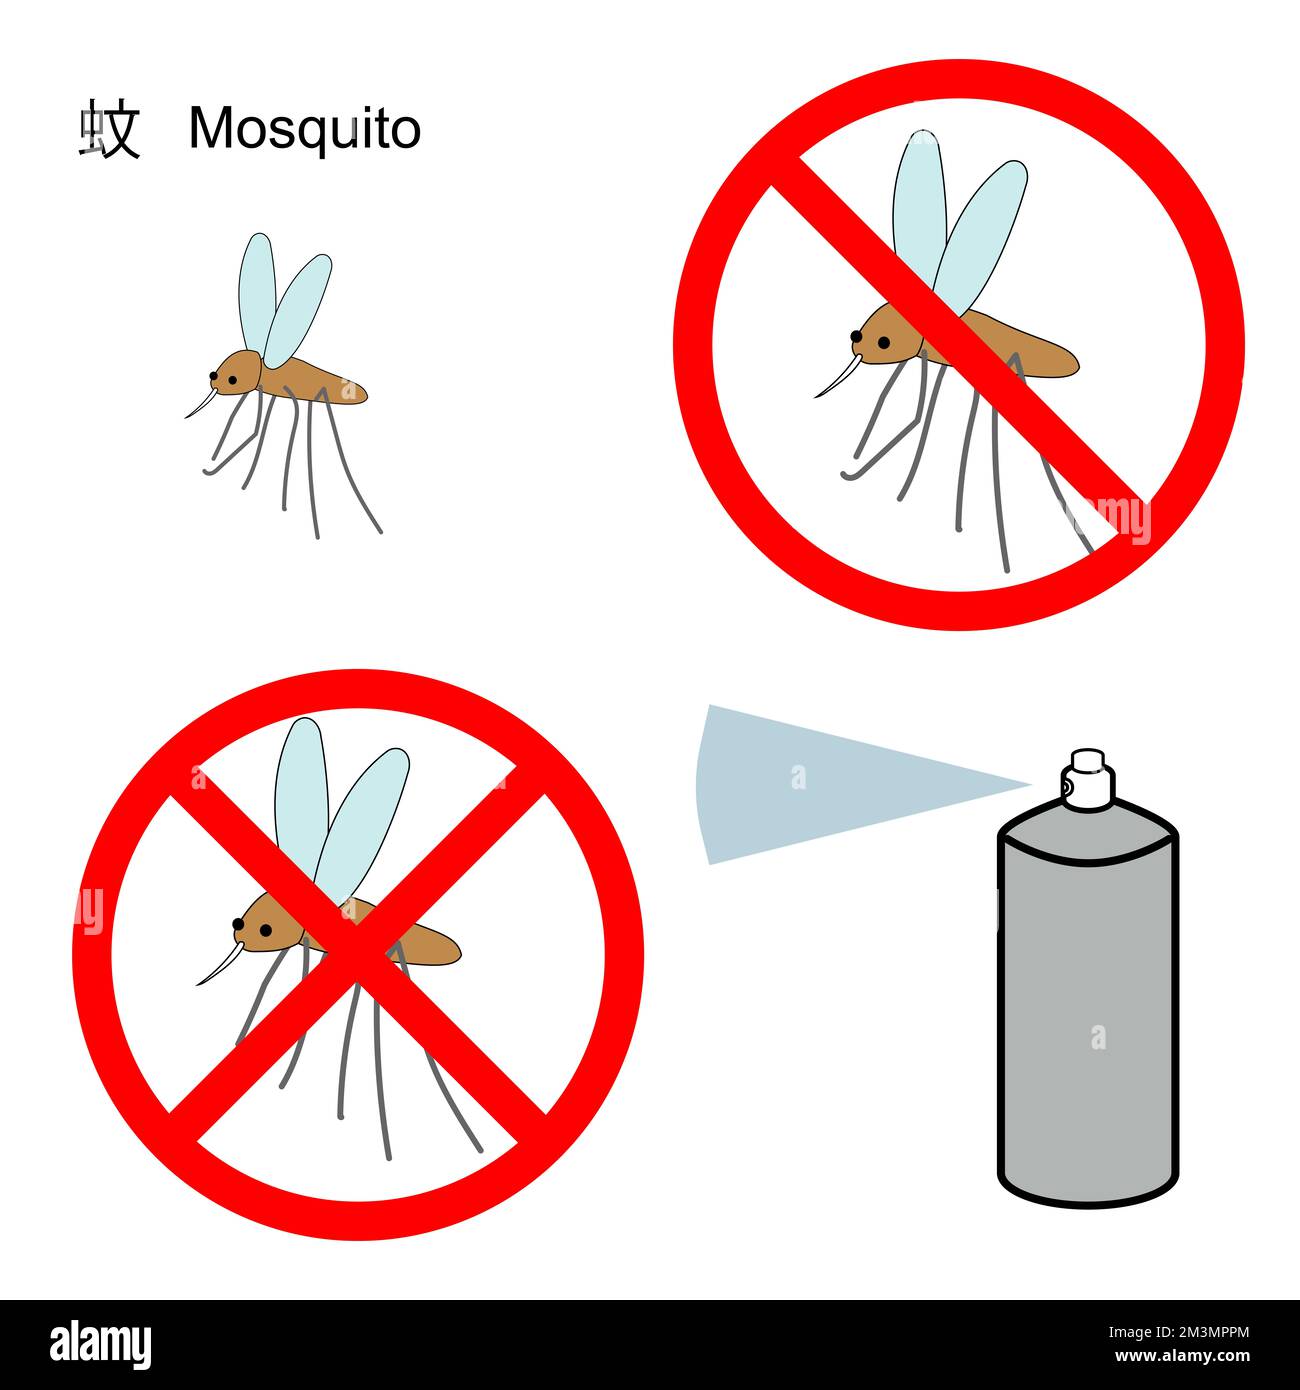 A set of mosquitoes icon and prevetion mark with medication, japanese letters, translation as mosquitoes Stock Photo